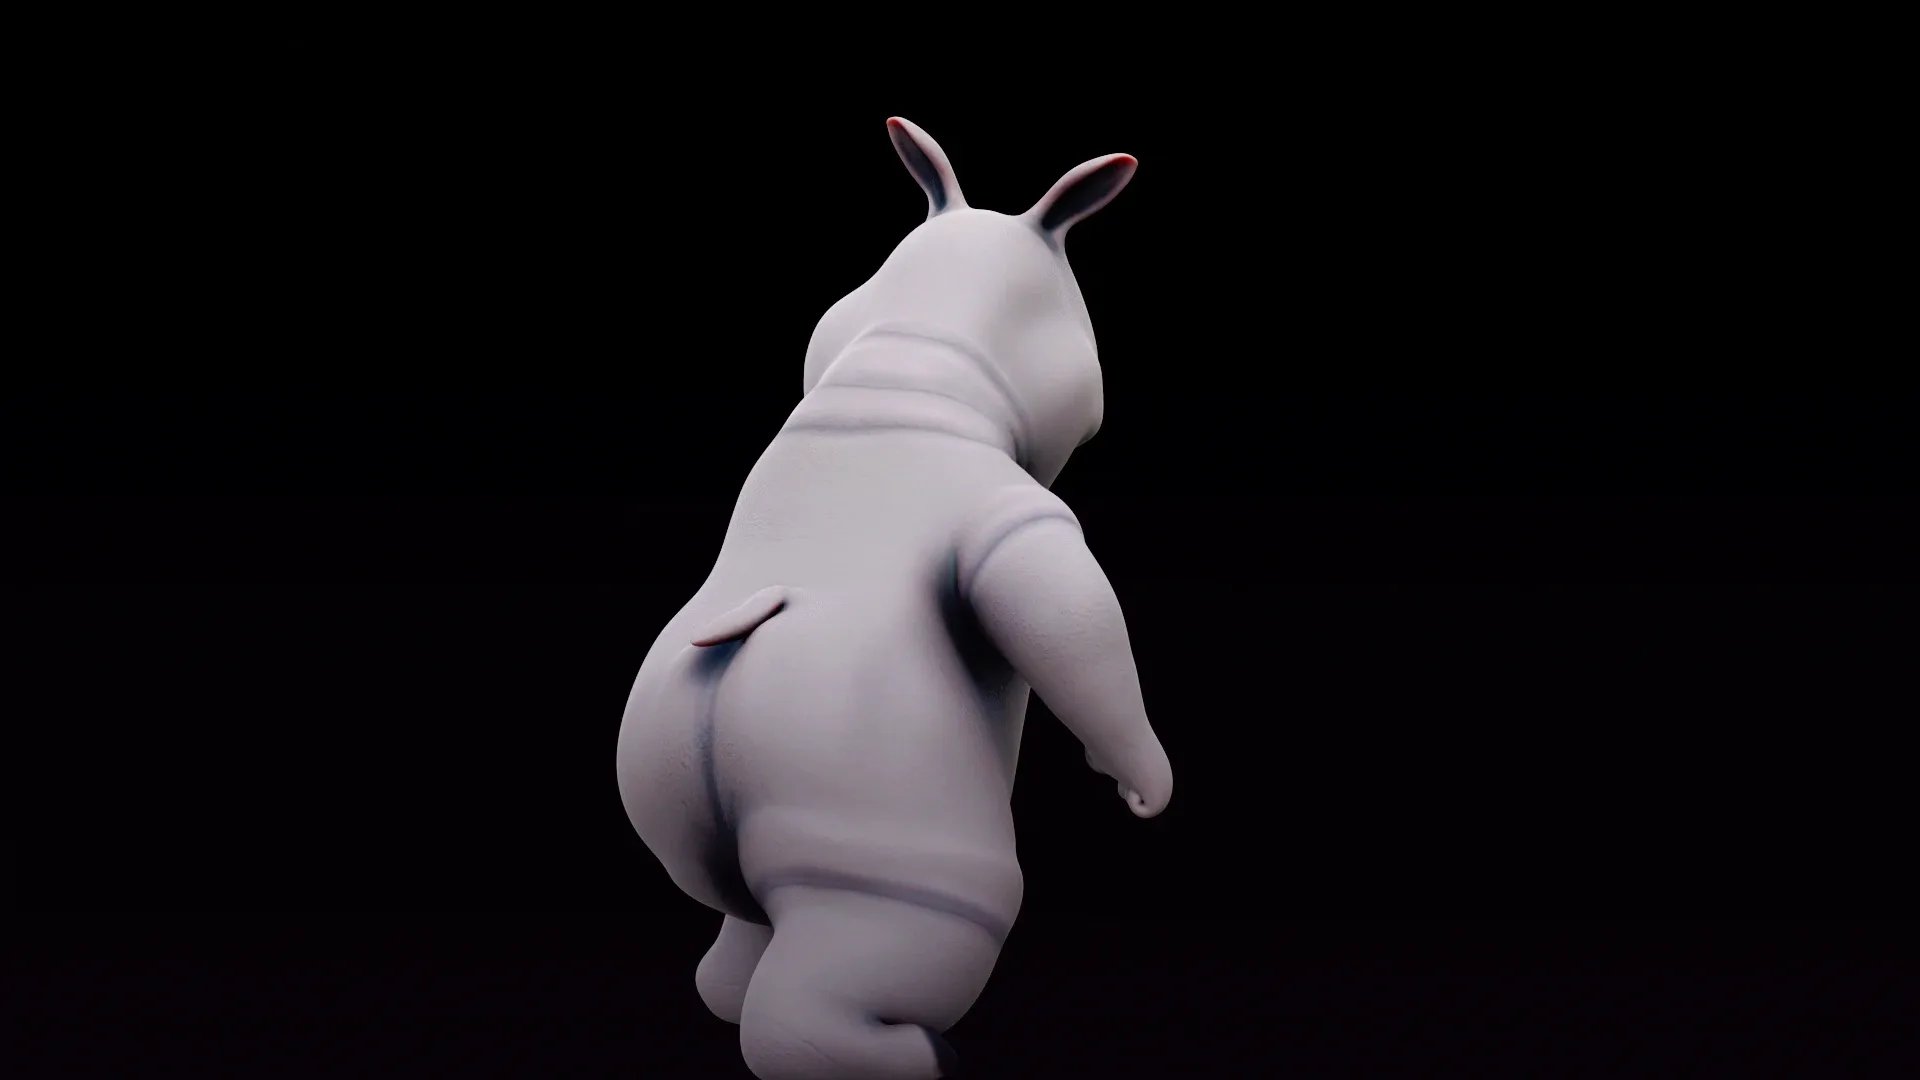 Rhino - rigged cartoon character for blender Low-poly 3D model